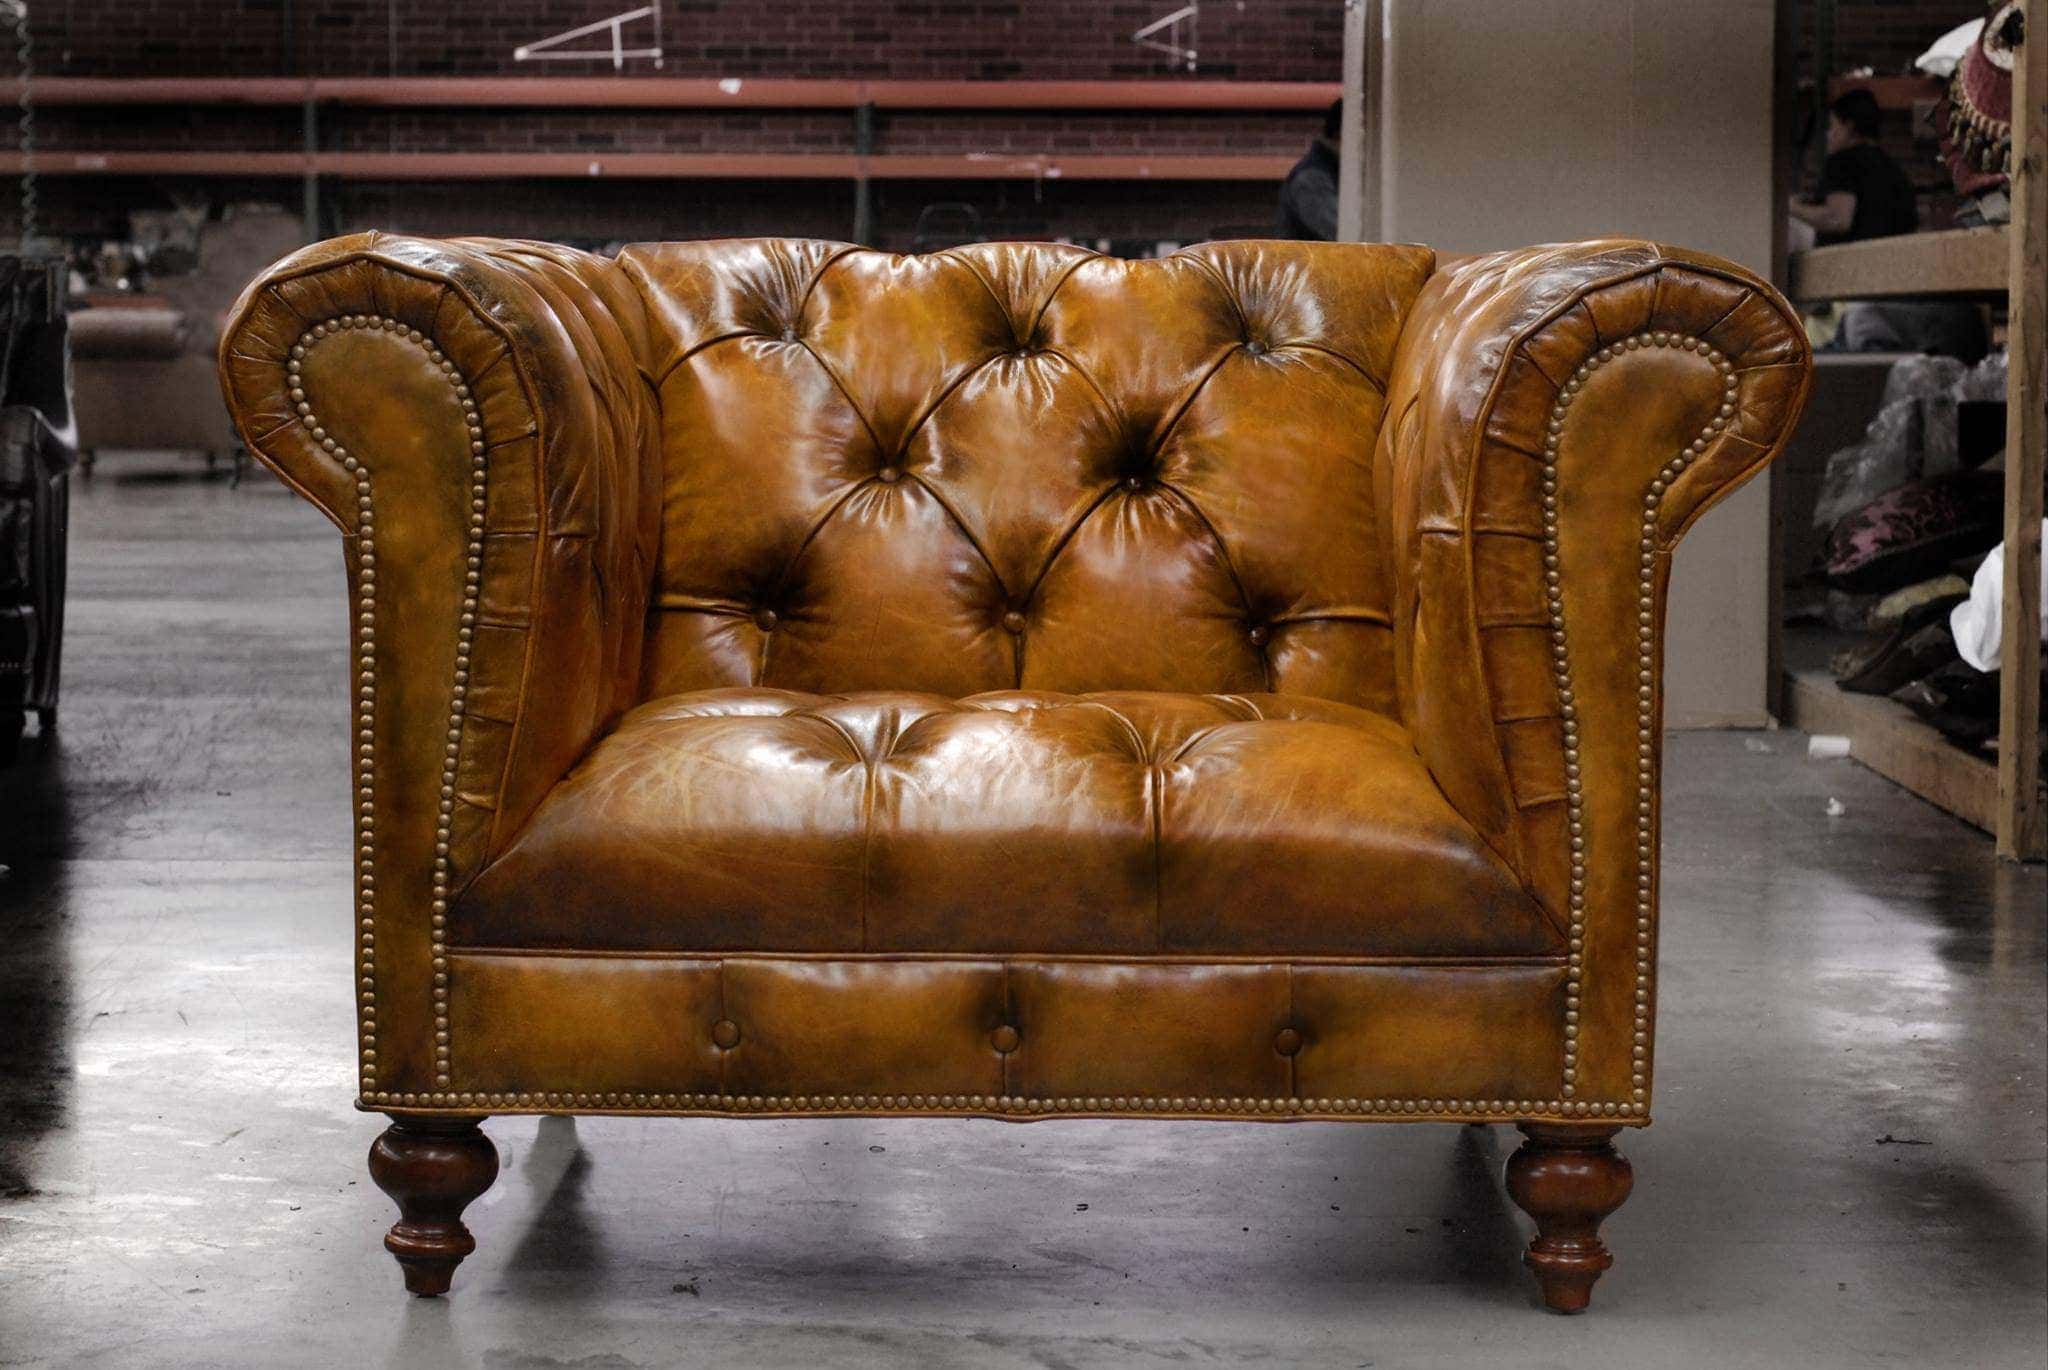 Custom Made Hemingway Chesterfield Armchair with Optional Tufted Seat and Scalloped Arm